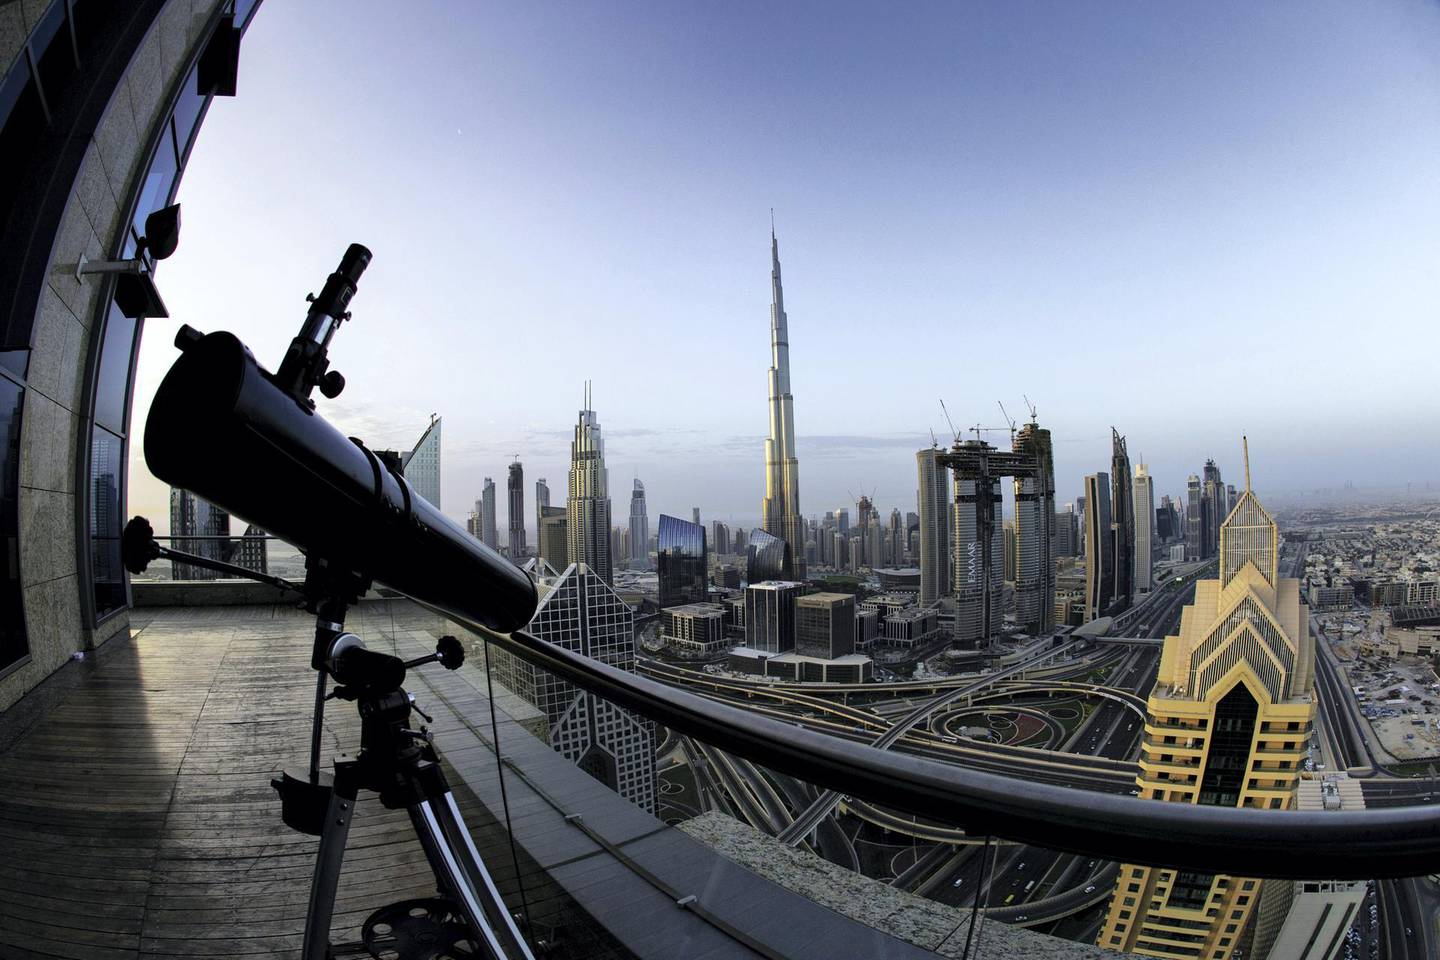 A telescope sits on the outdoor deck of a skyscraper overlooking the city skyline towards the Burj Khalifa tower, center, and the Address Sky View, center right, under construction by developers Emaar Properties PJSC, in Dubai, United Arab Emirates, on Wednesday, April 11, 2018. Transformed into a flamboyant city state from an impoverished Gulf port in less than 50 years, Dubai defied geology to build skyscrapers and elaborately shaped islands in the sea. Photographer: Christopher Pike/Bloomberg